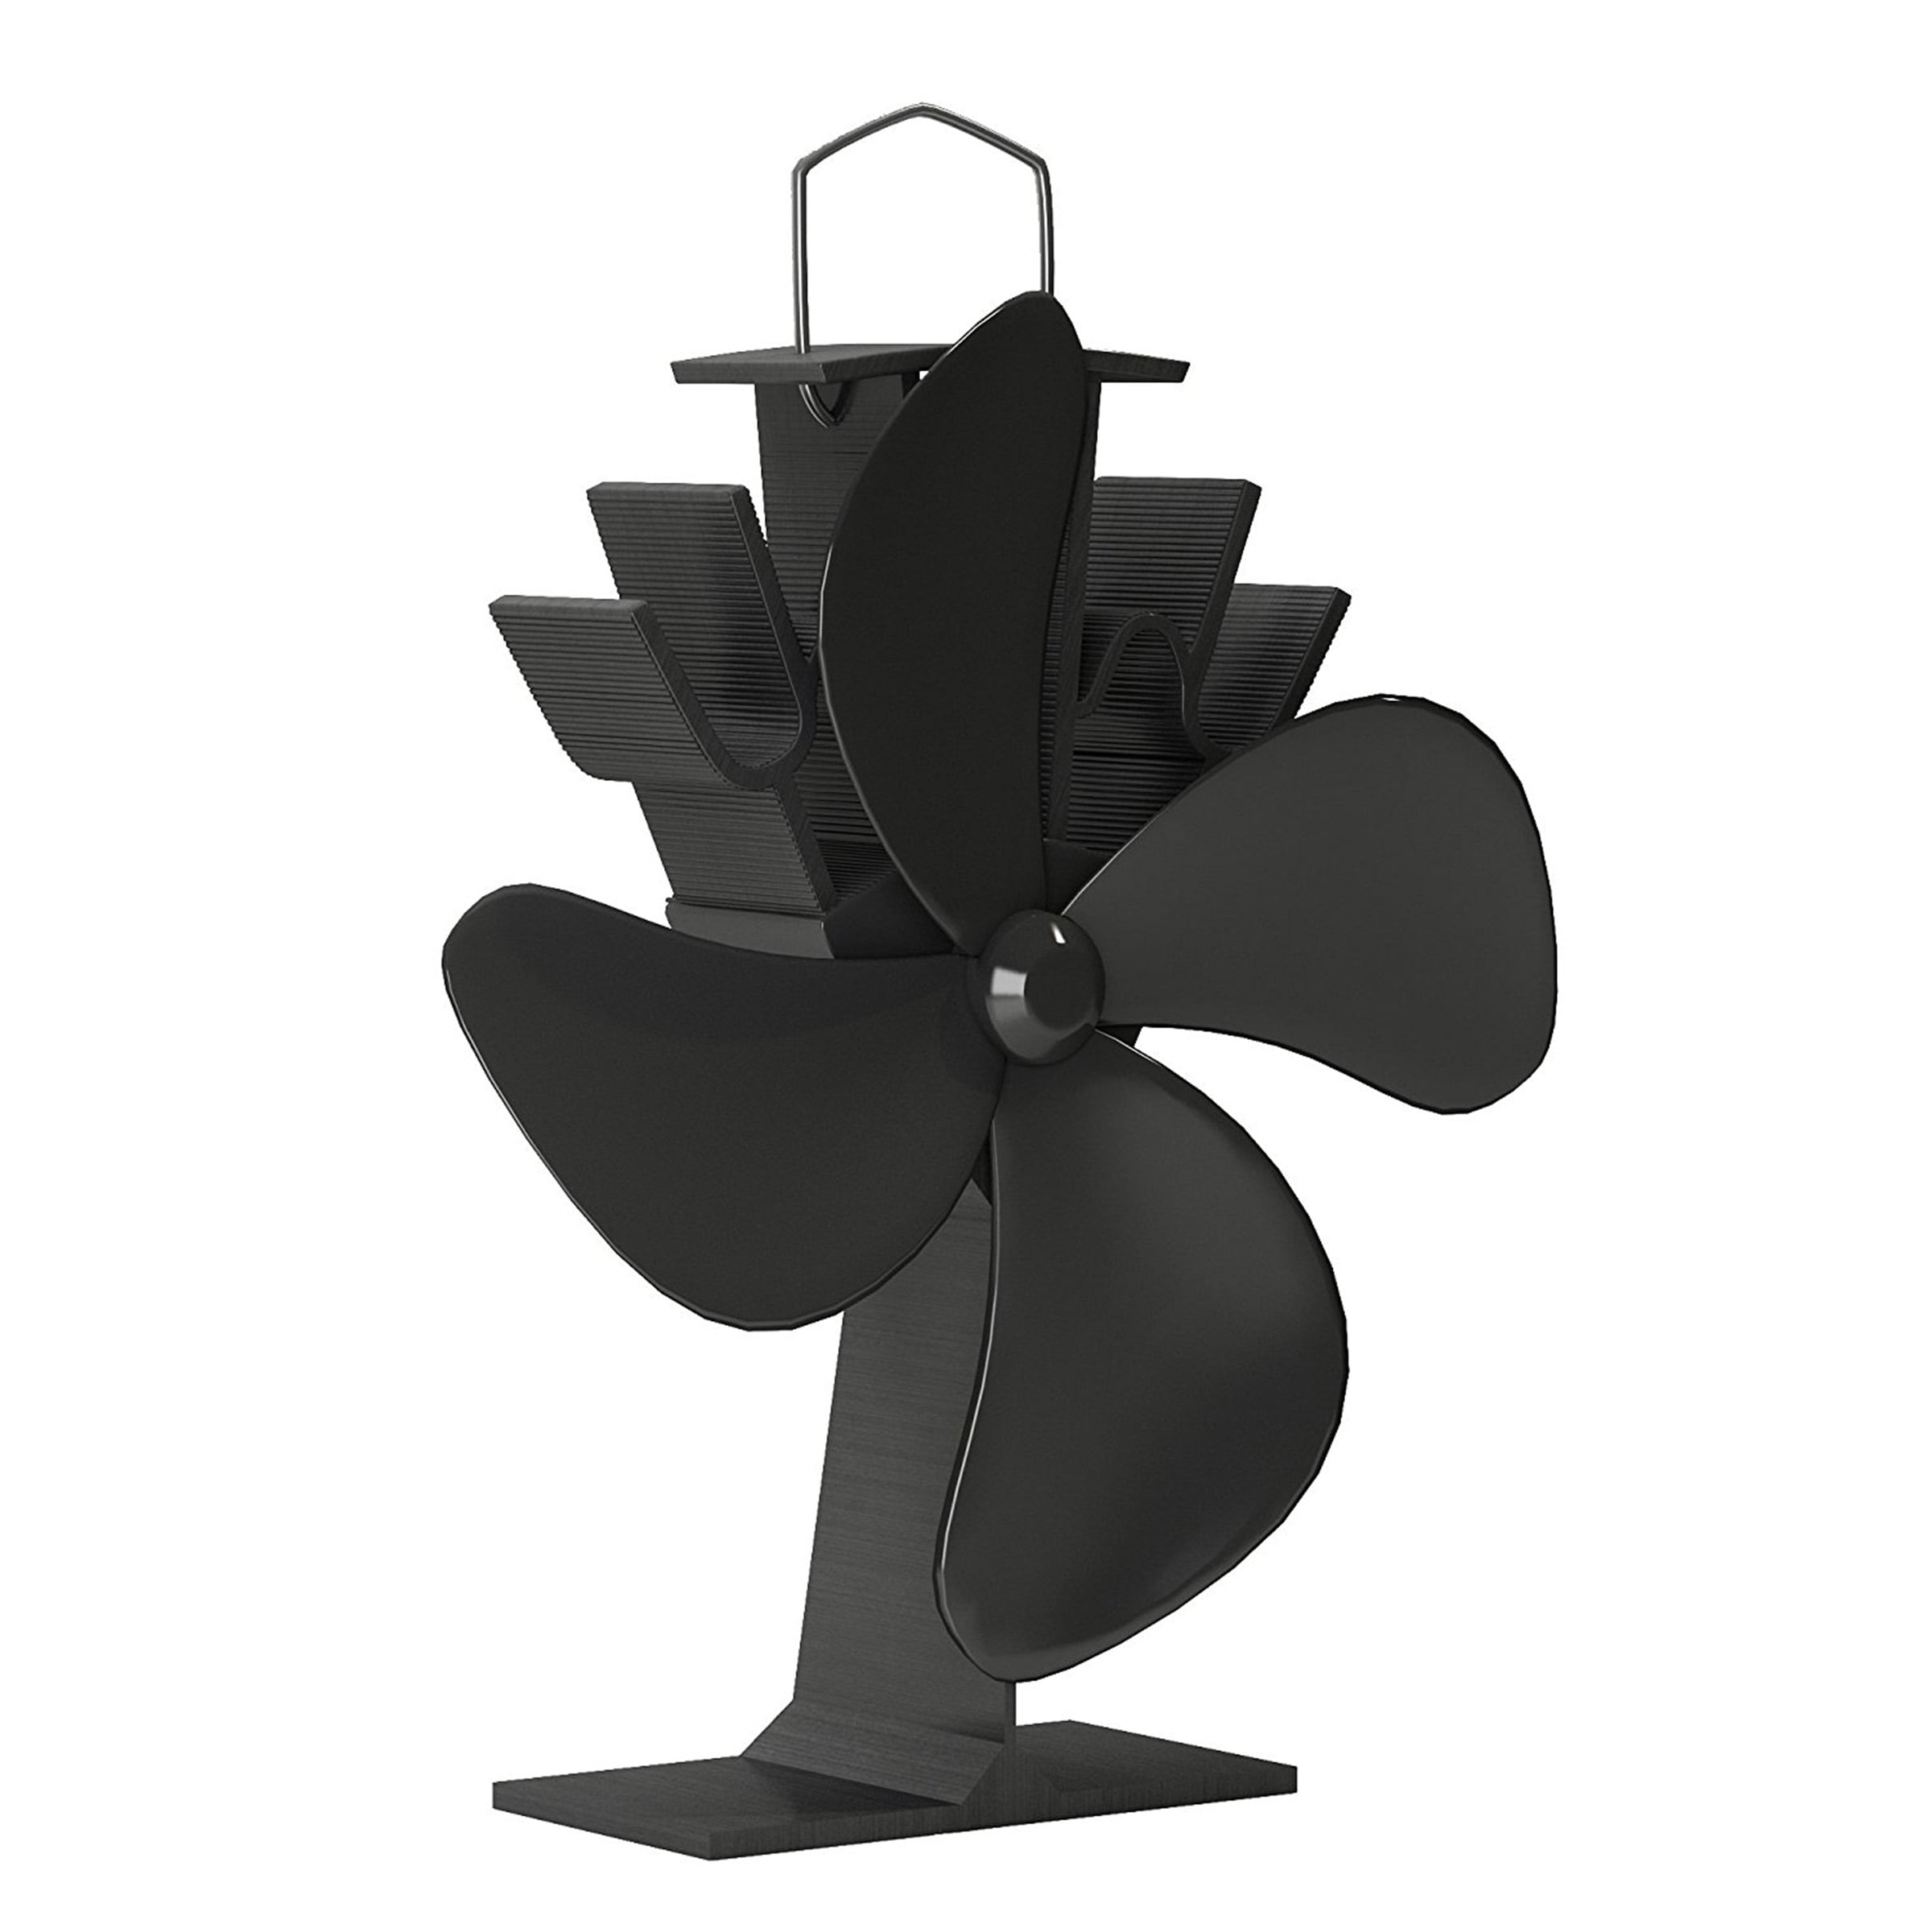 Stove Fan- Heat Powered Fan for Wood Burning Stoves or Fireplaces, Disperses Warm Air Through by - Walmart.com